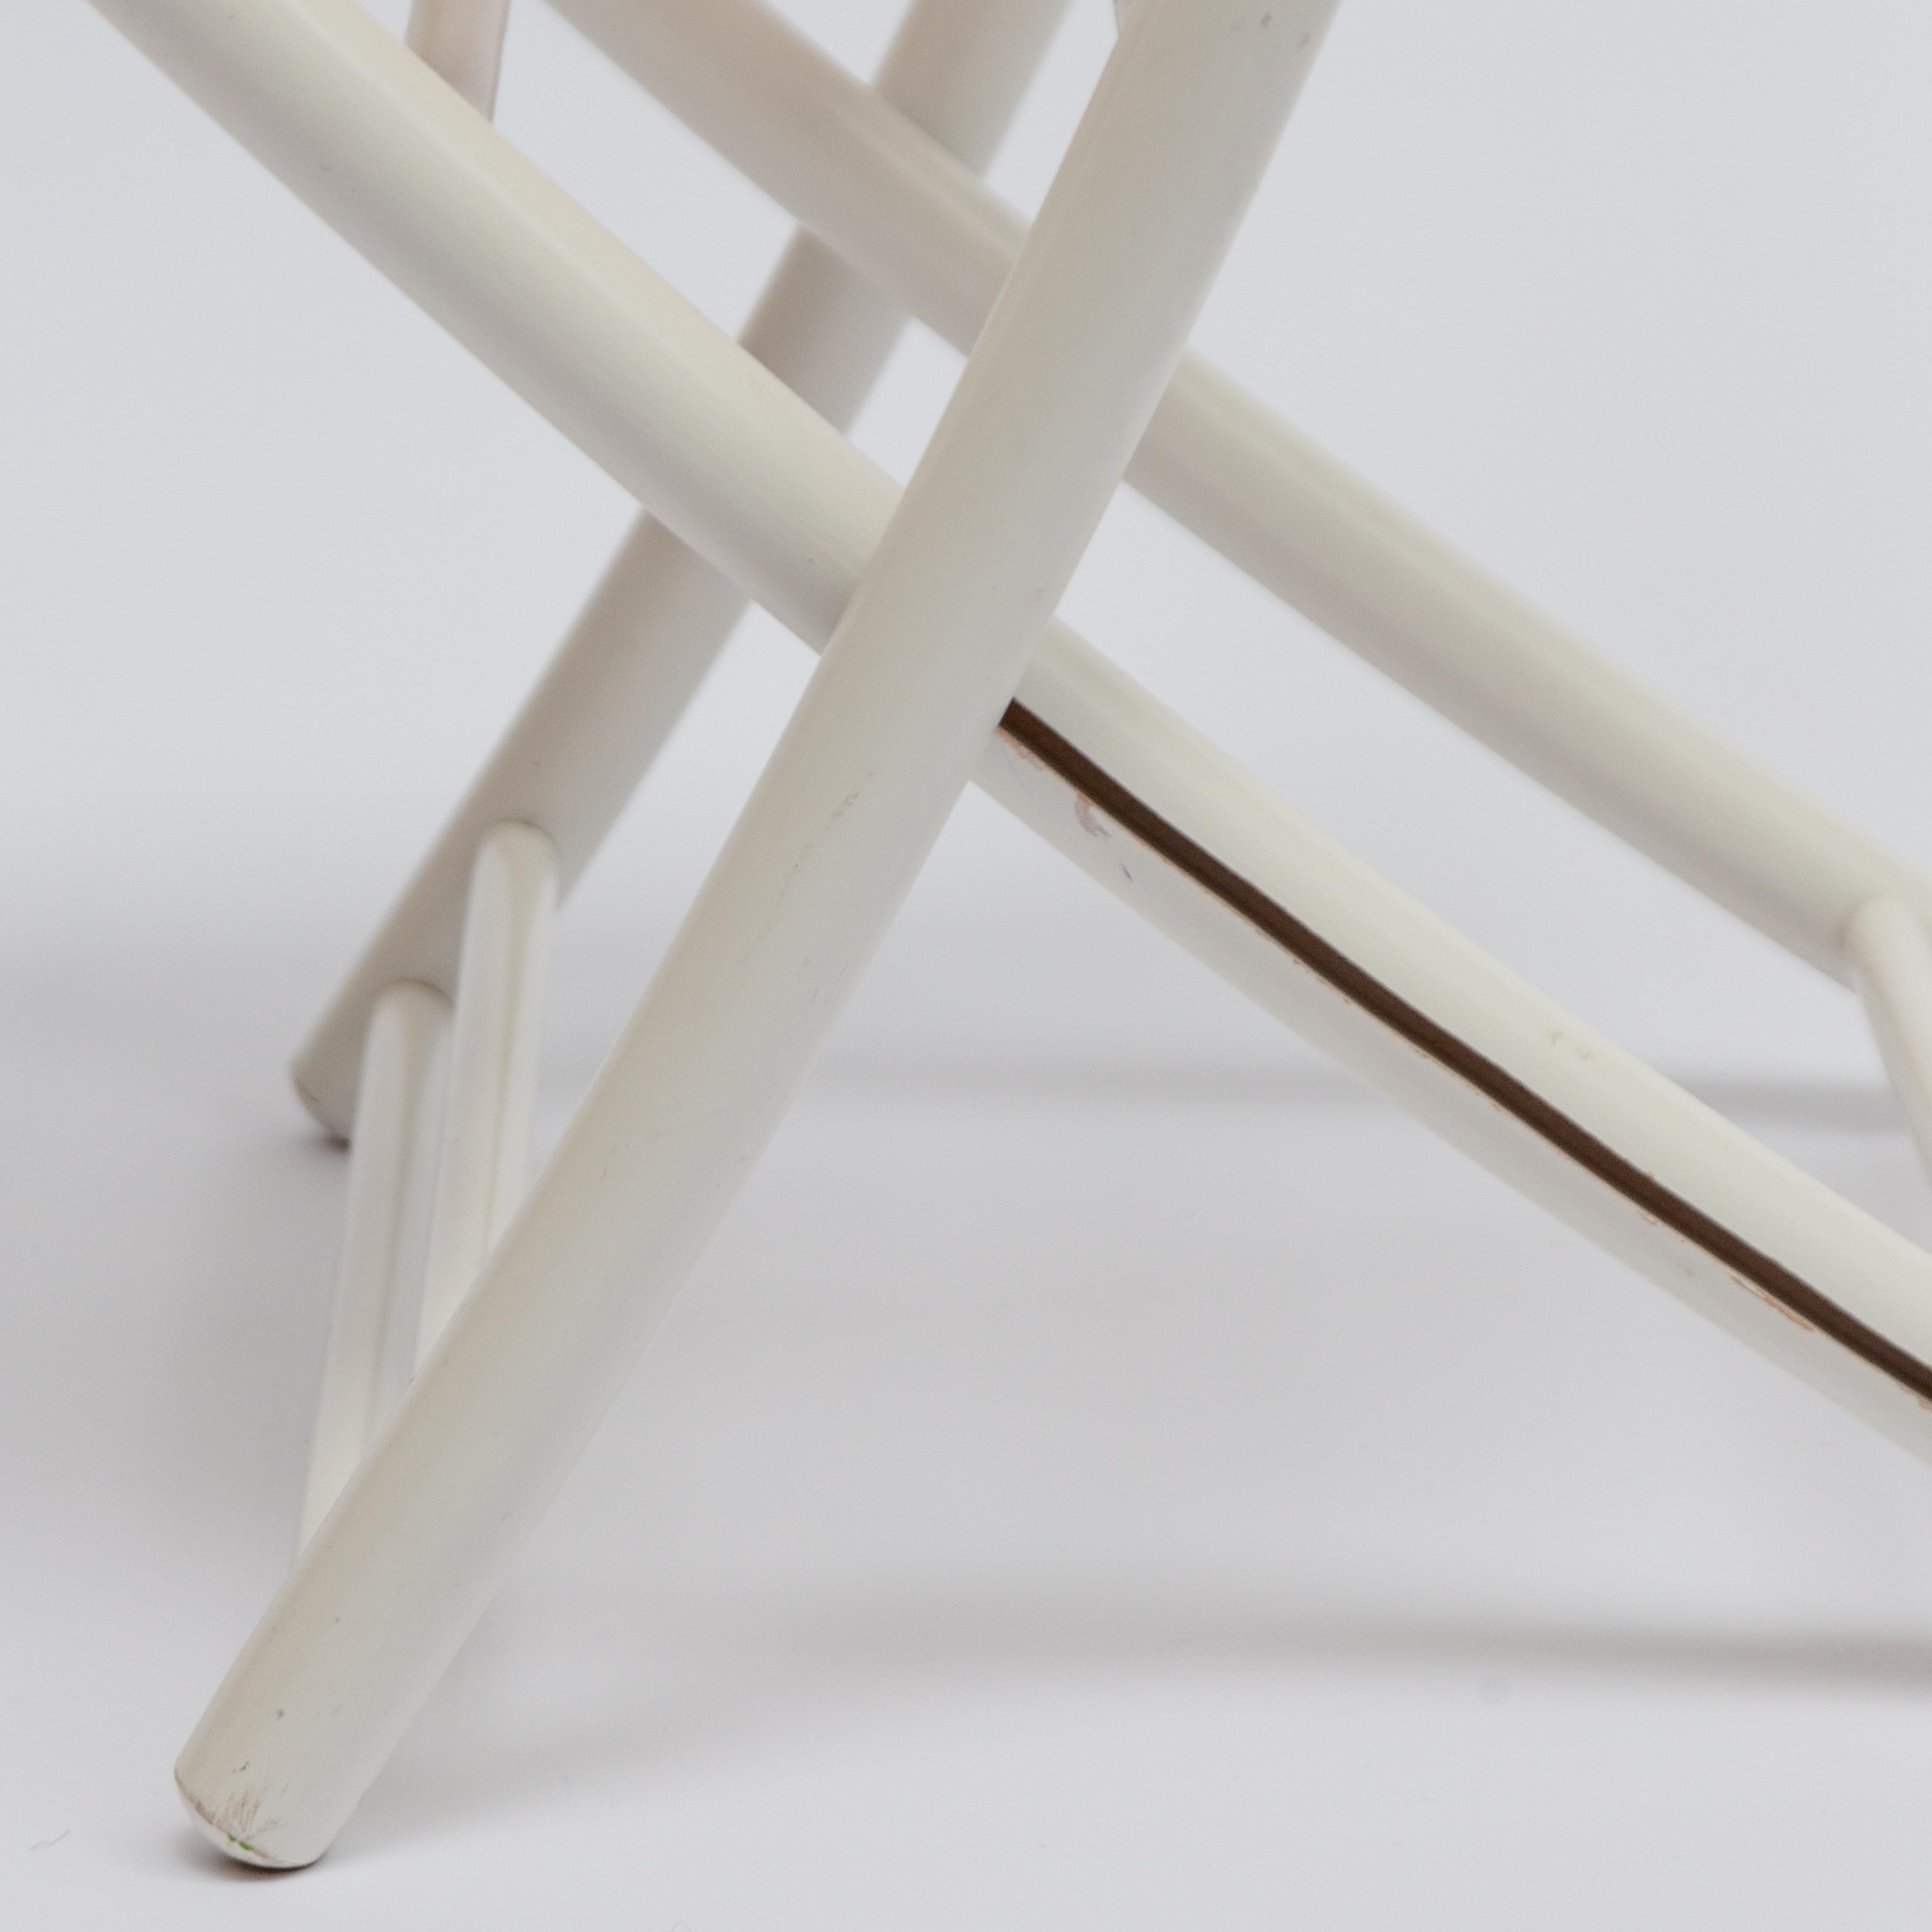 Wicker Folding Chair in White Lacquered Wood with Webbing Seat and Backrest 1960s-1970s